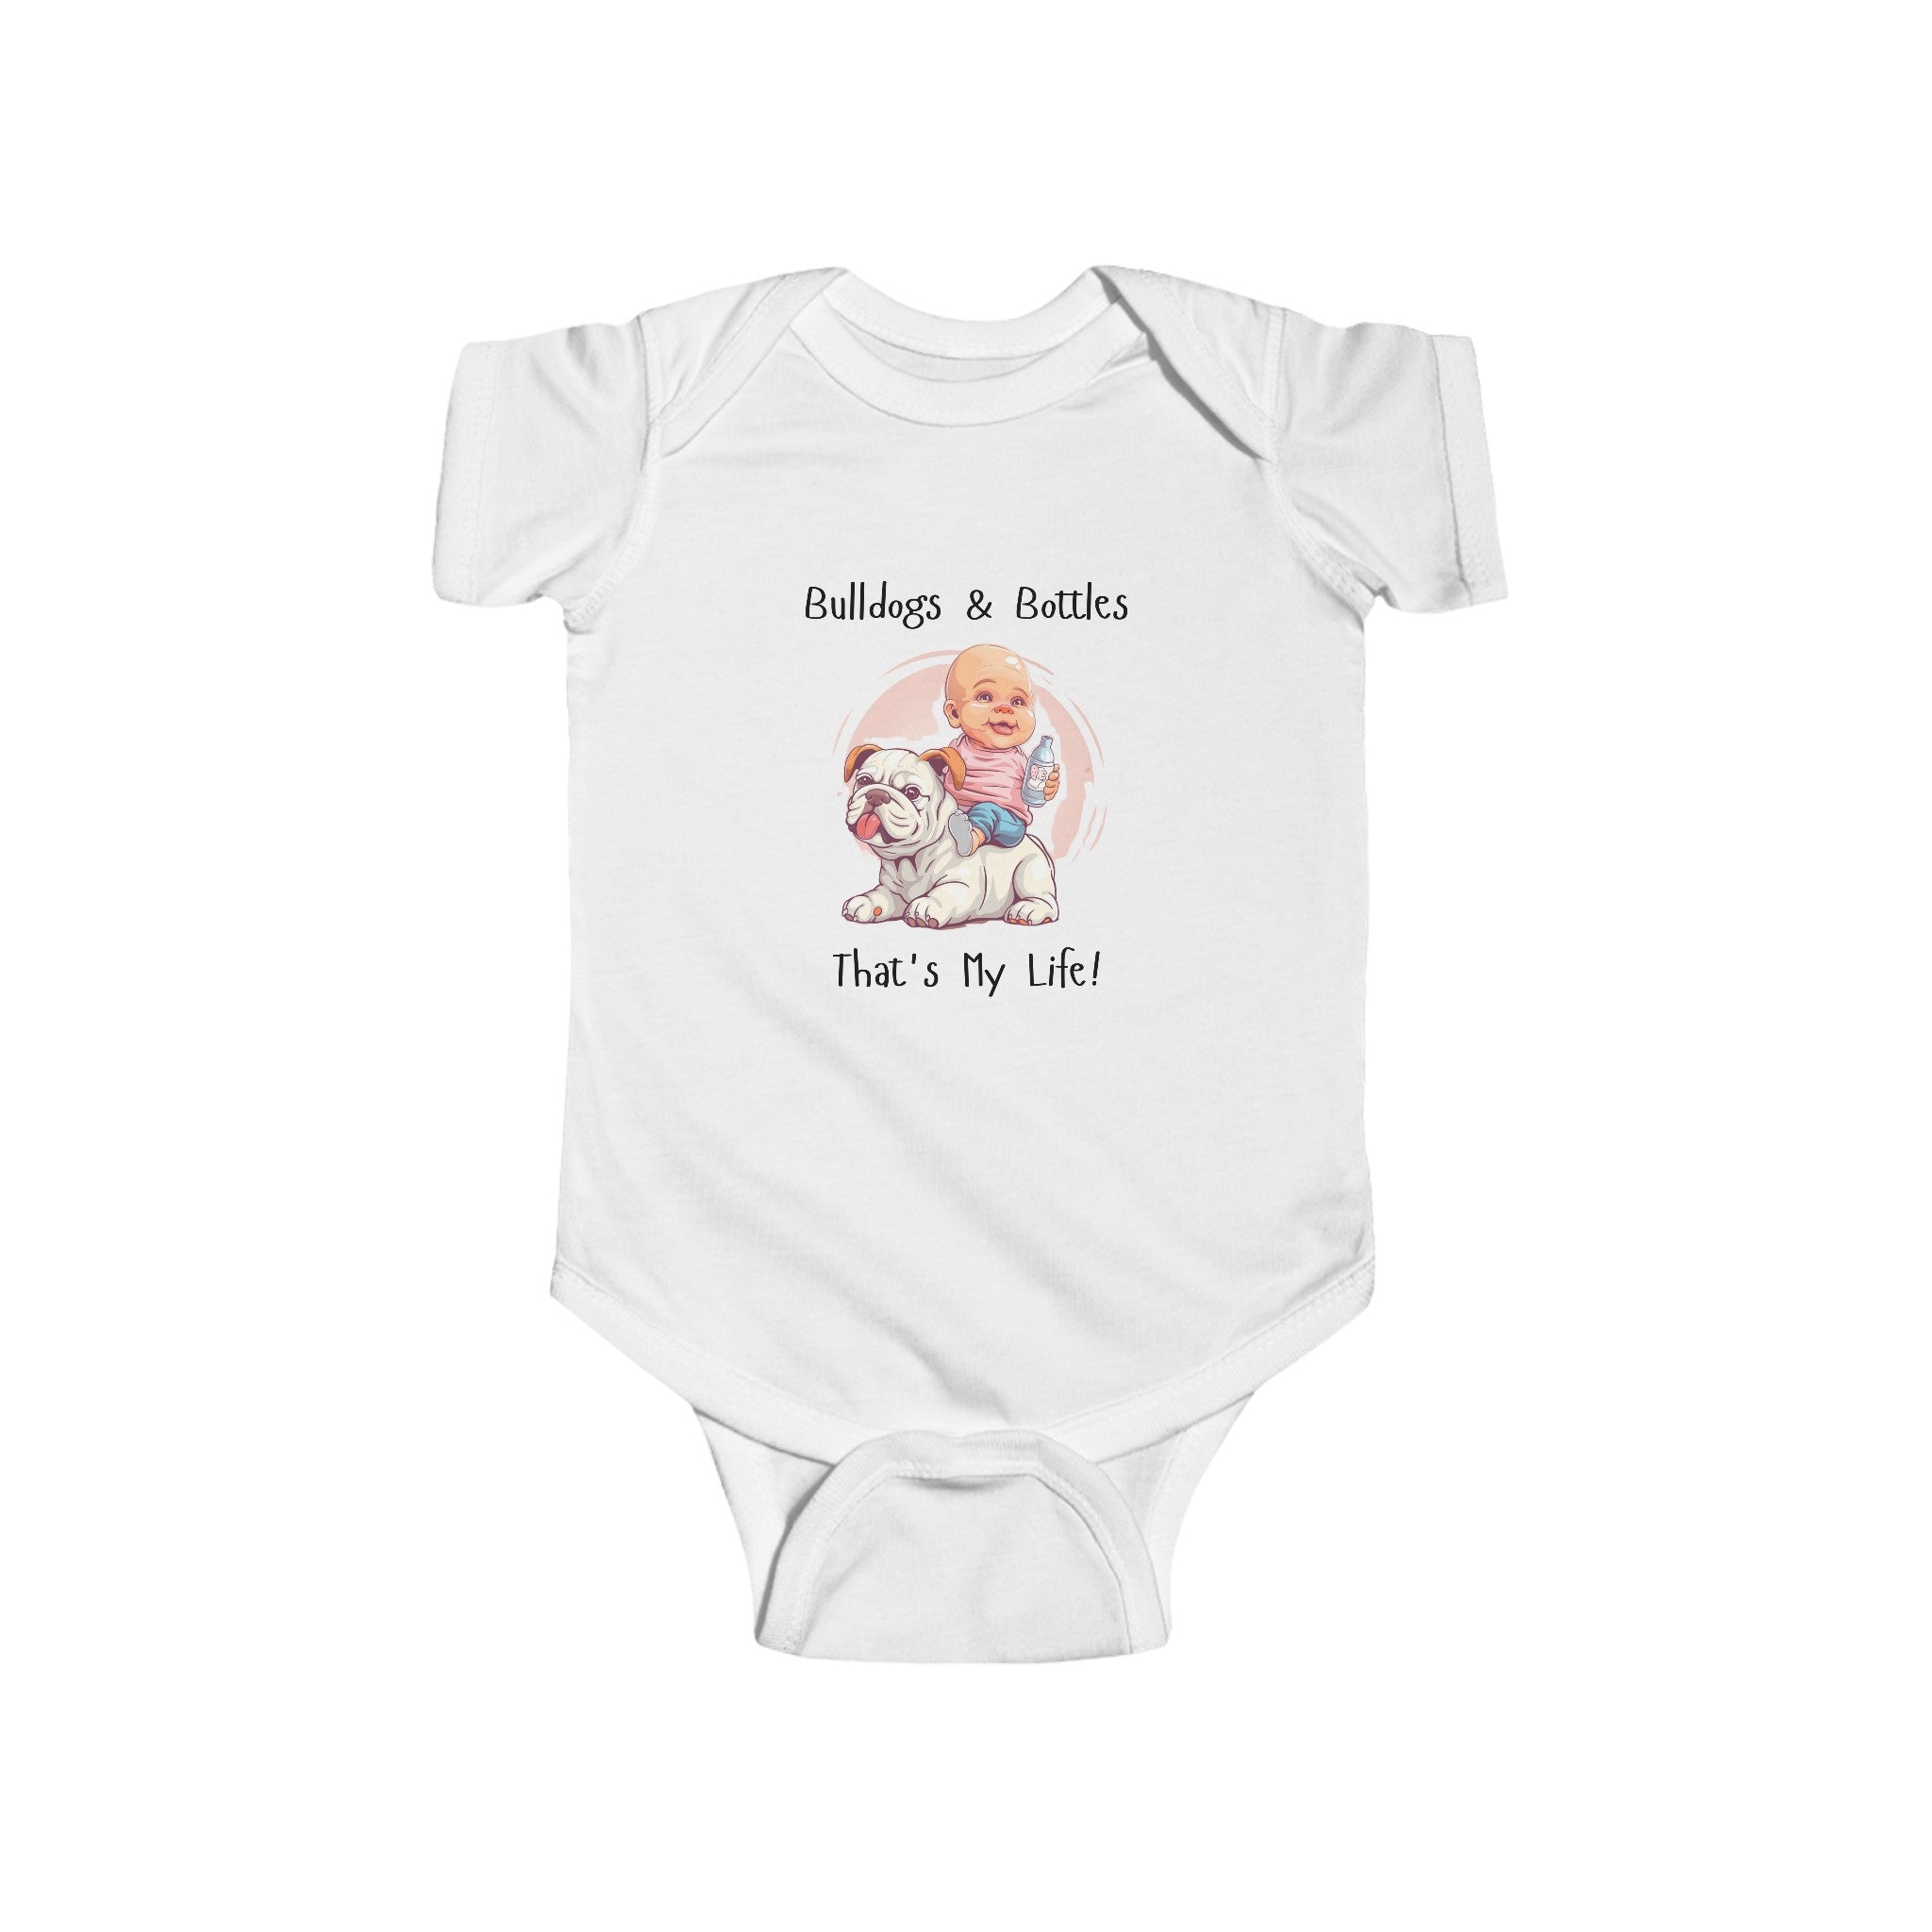 Bulldogs and Bottles, That's My Life!" Baby Onesie (English/Girl)